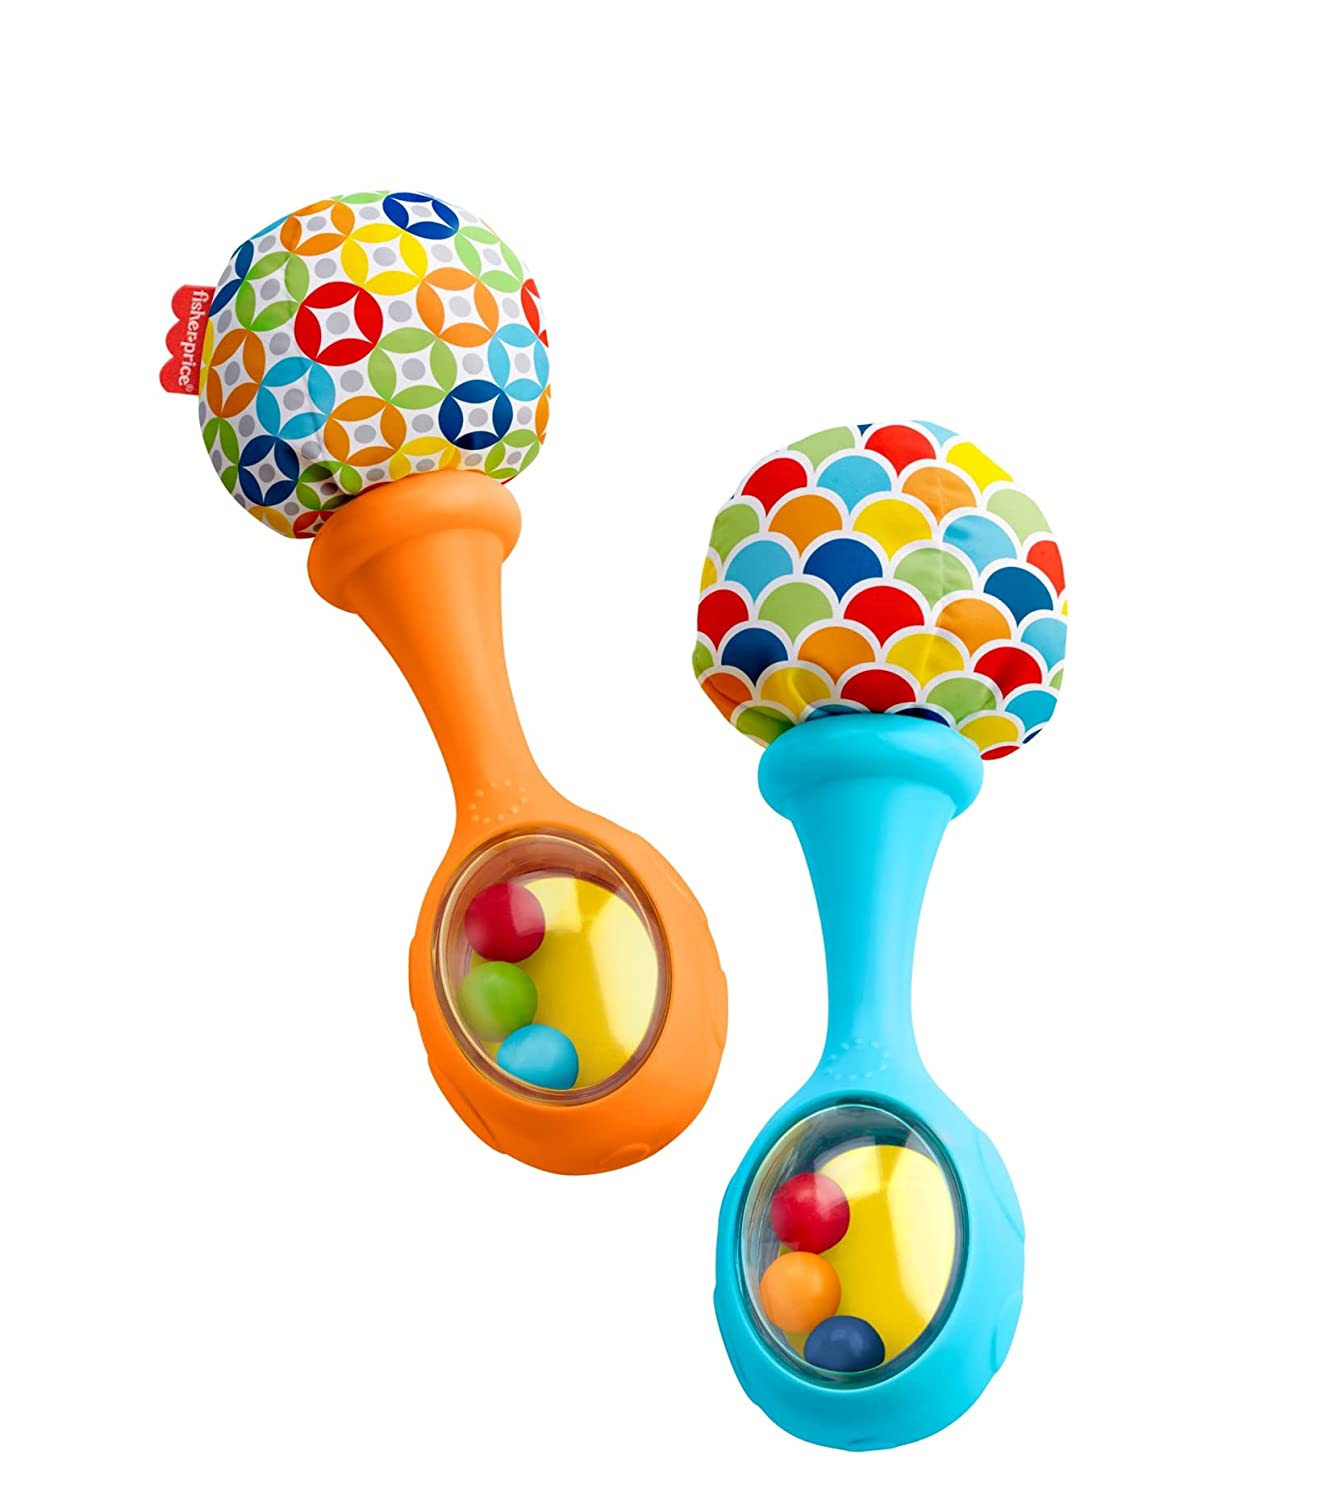 Fisher-Price Maracas, Set Of 2 Newborn Toys, Blue And Orange, Rattle 'N Rock Maracas, Baby Toys For Ages 3+ Months
